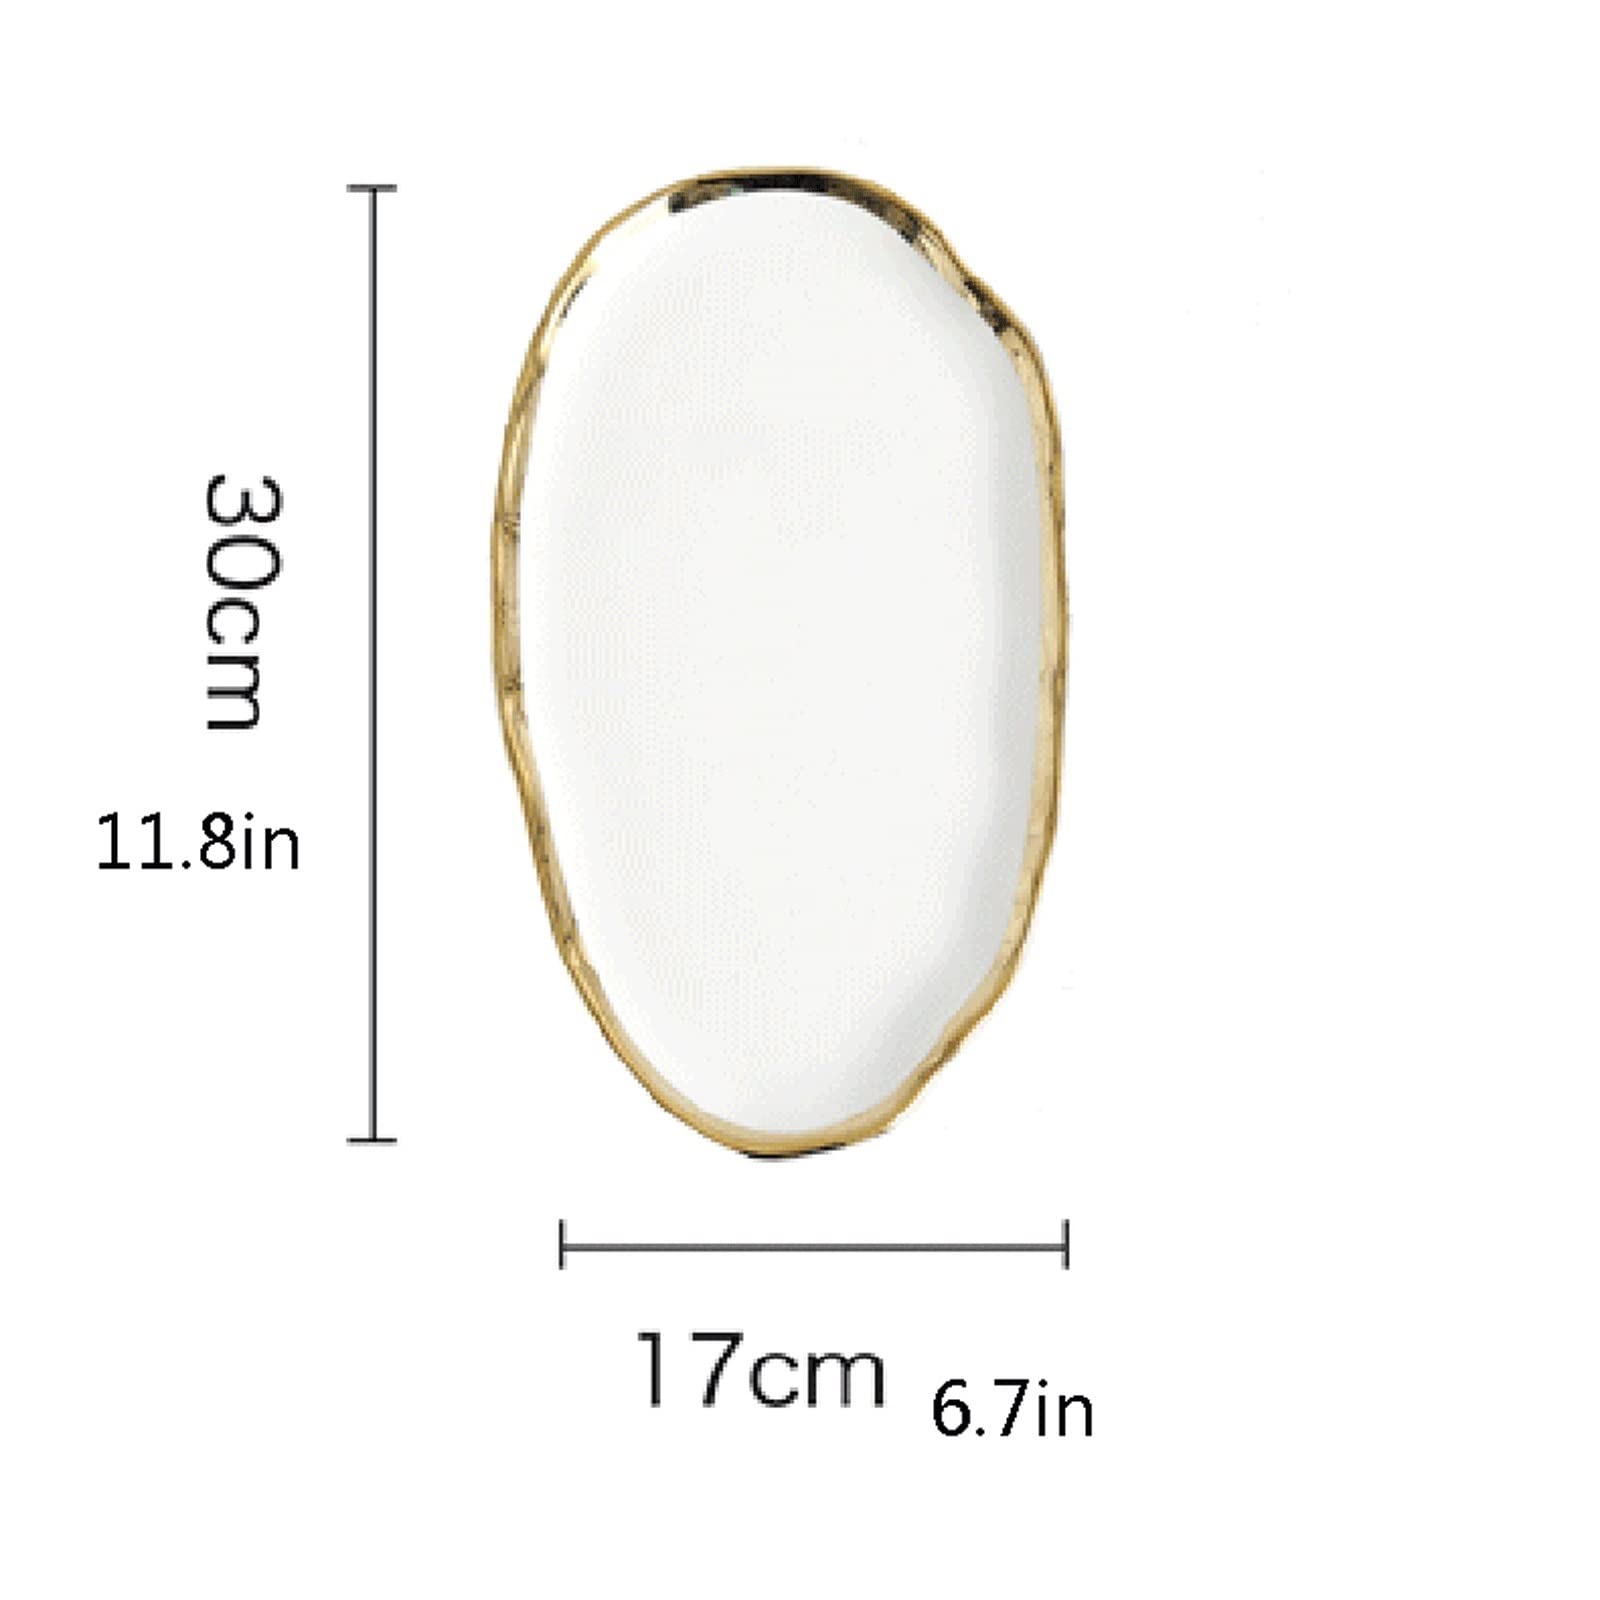 Breakfast Tray Tray irregular ceramic tray gold rimmed serving tray dressing table bathroom kitchen coffee table decorative tray white Serving Trays